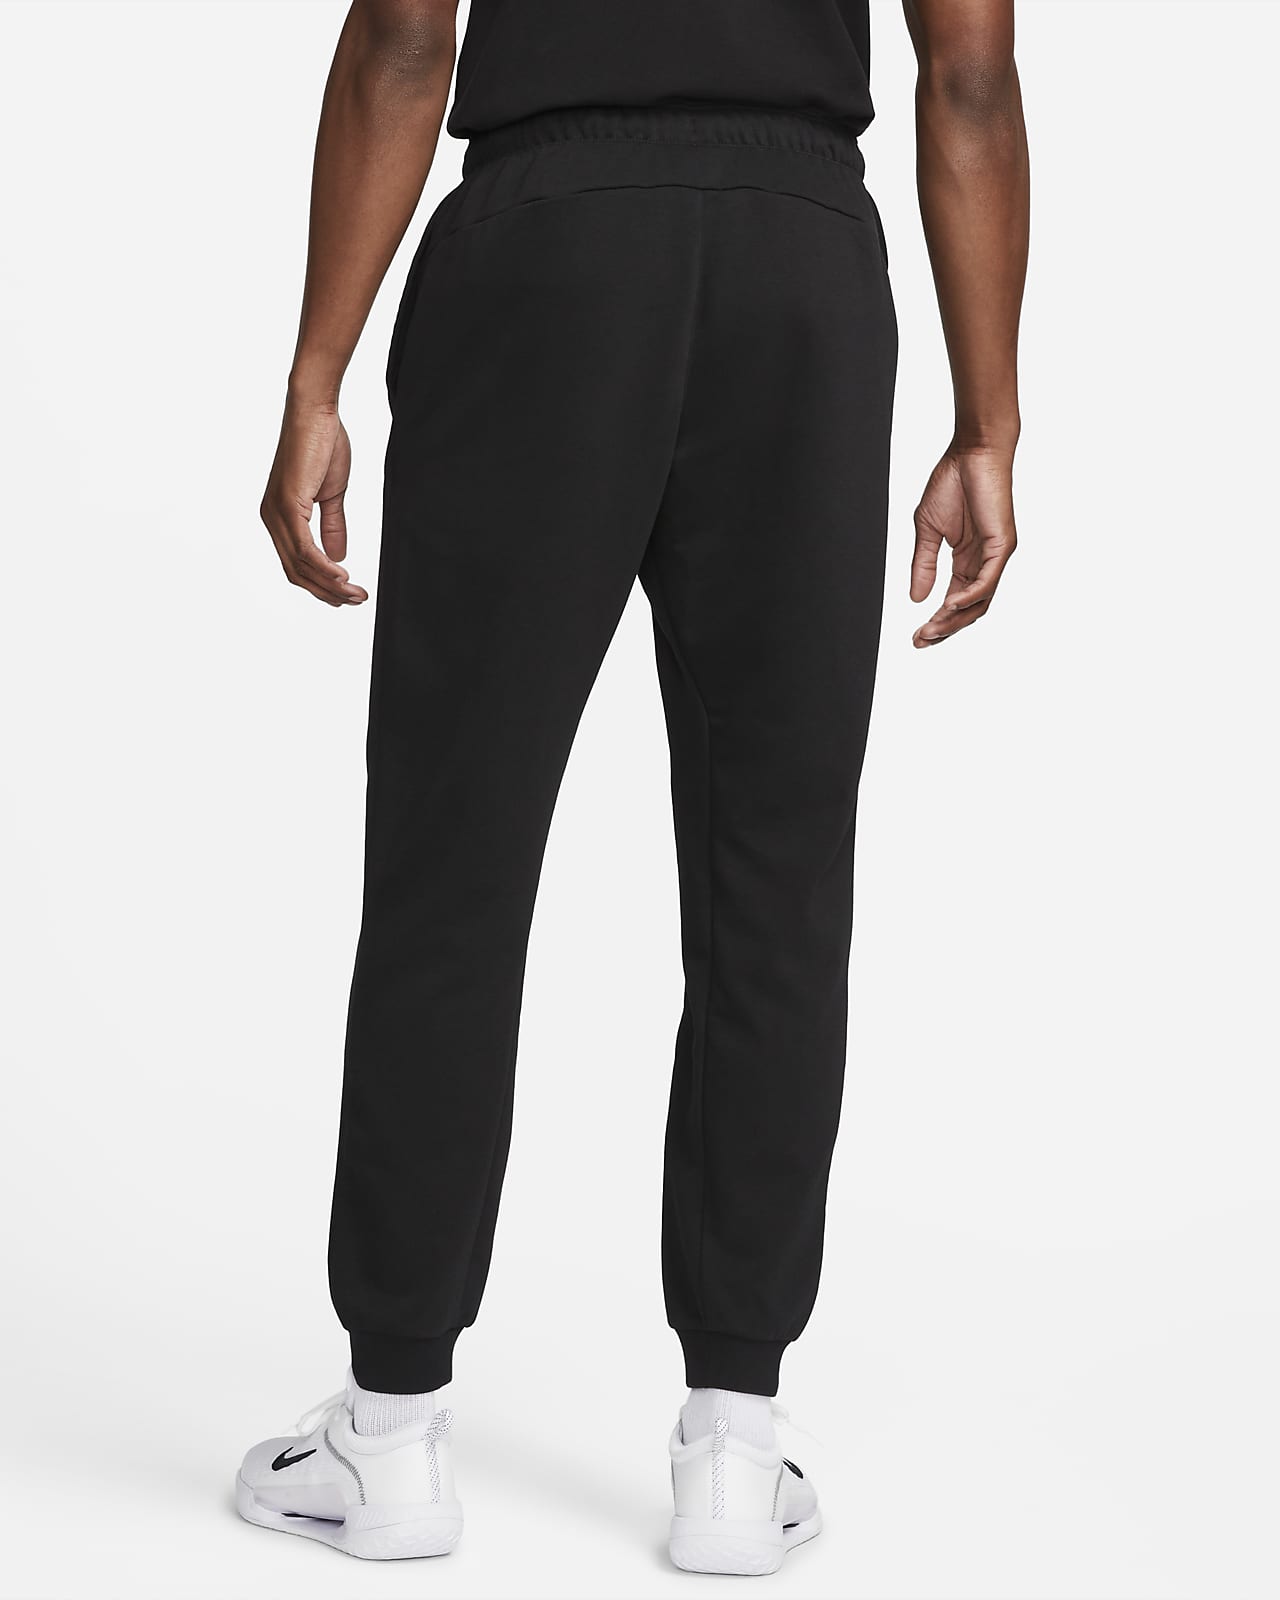  Nike Court Heritage Men's French Terry Tennis Pants